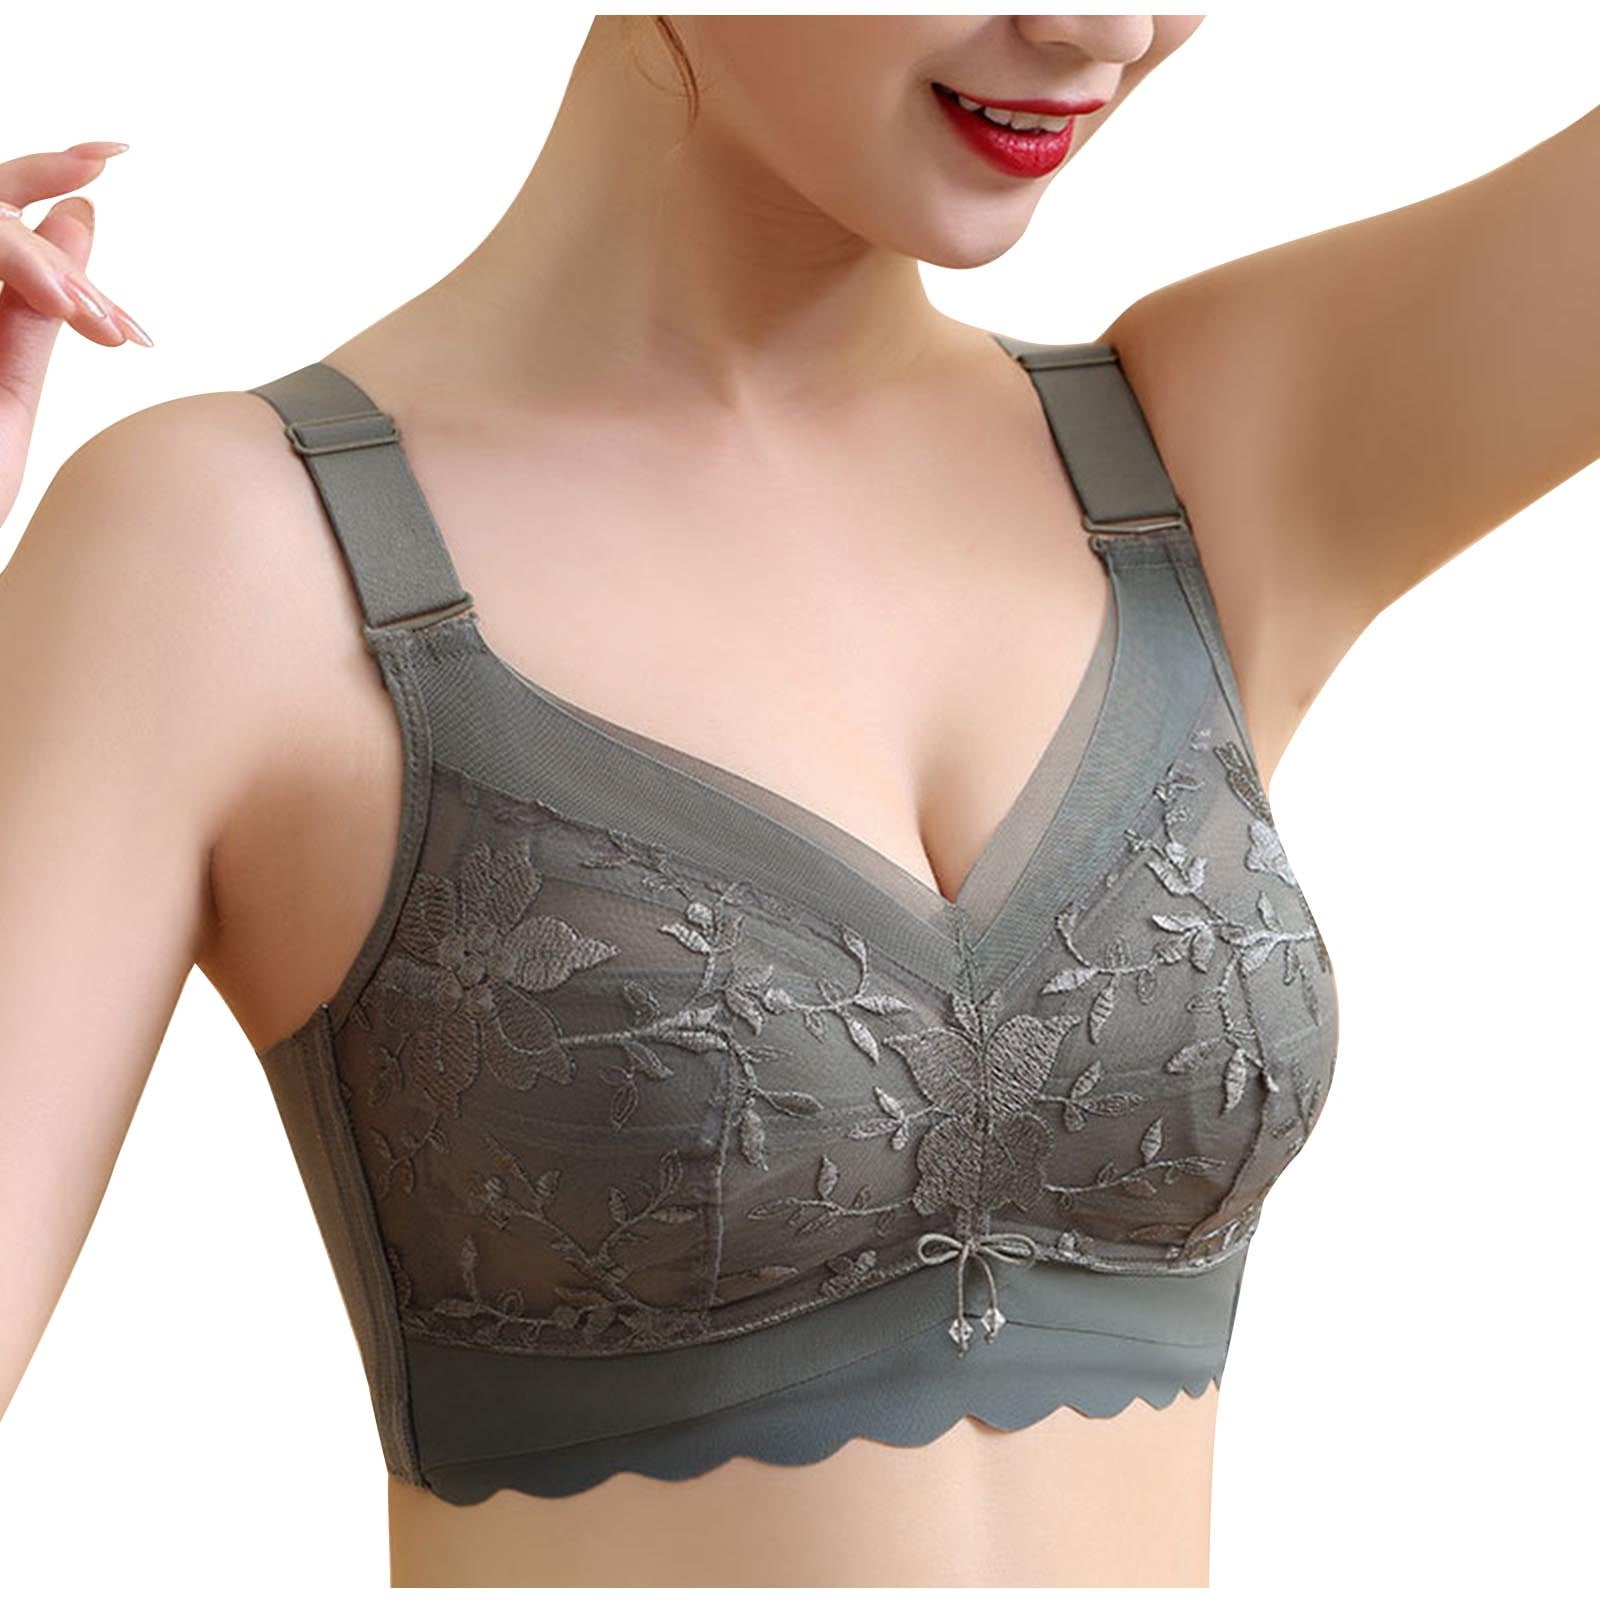 Girls In Large Underwear Bandage Cord Pull B Gather 200 Jin Big Size Bra  Wireless Lingerie Femme Plus Size Bra Push Up Lace Bras From  Crazyshoppingstreet, $18.26